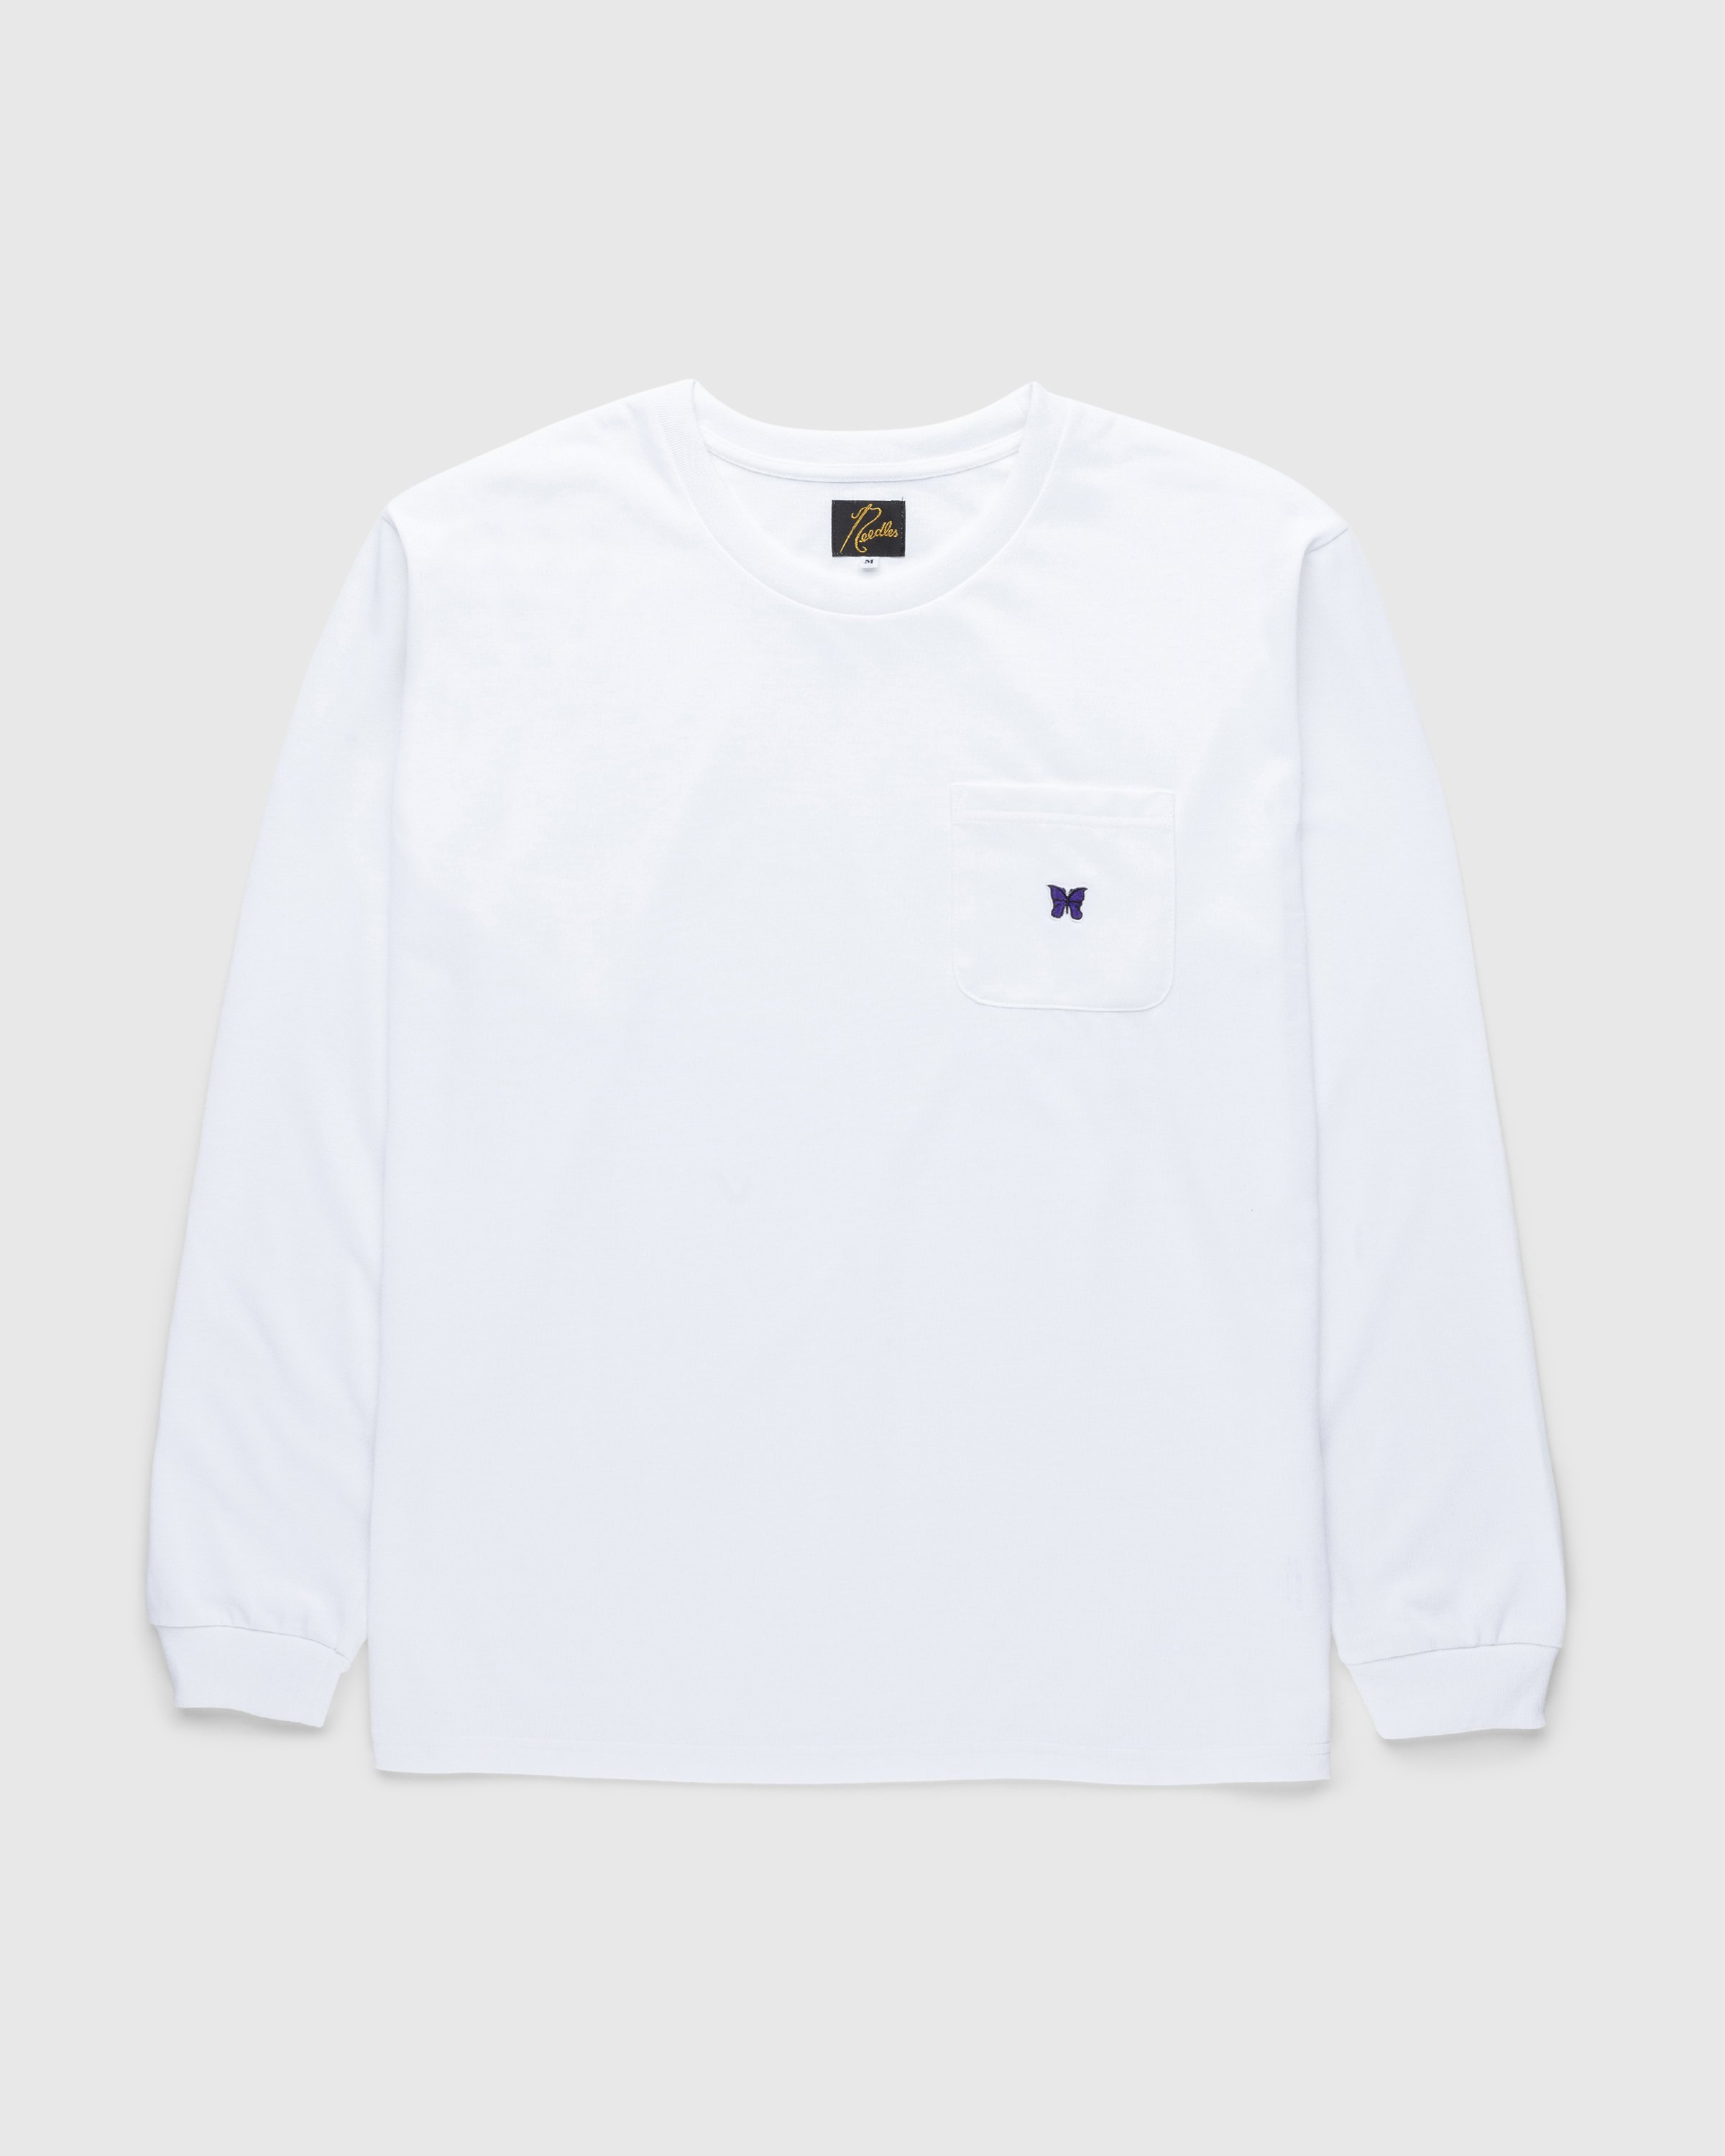 Needles - L/S Crew Neck Tee - Poly Jersey - Clothing - White - Image 1